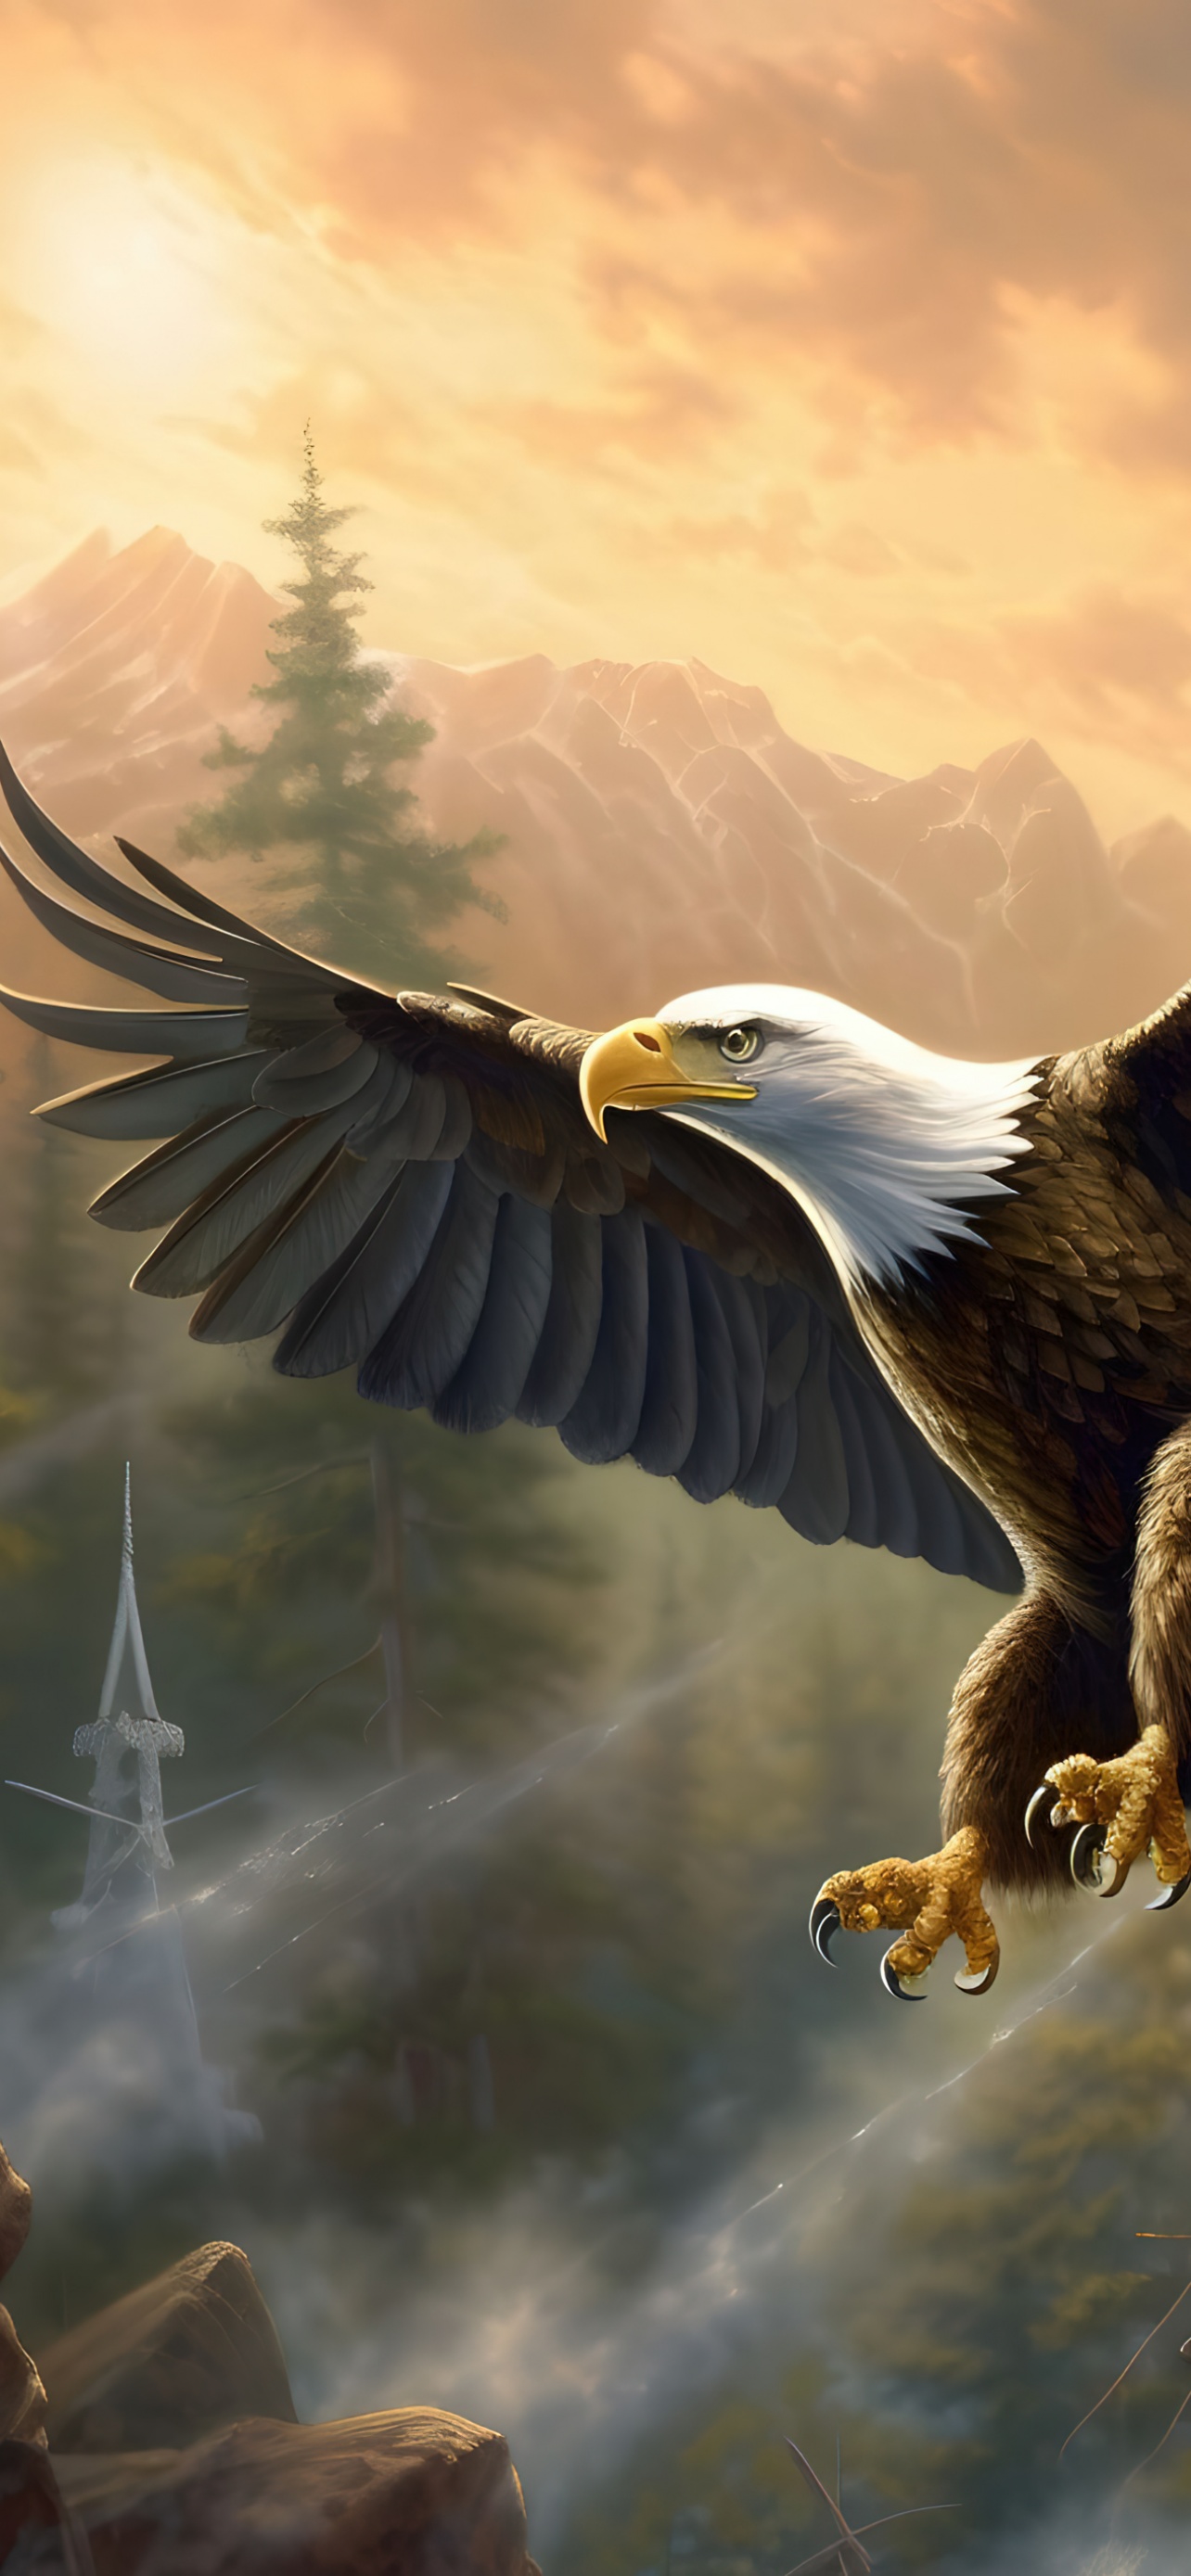 Eagle wallpaper by SPsuryavickey  Download on ZEDGE  56ef